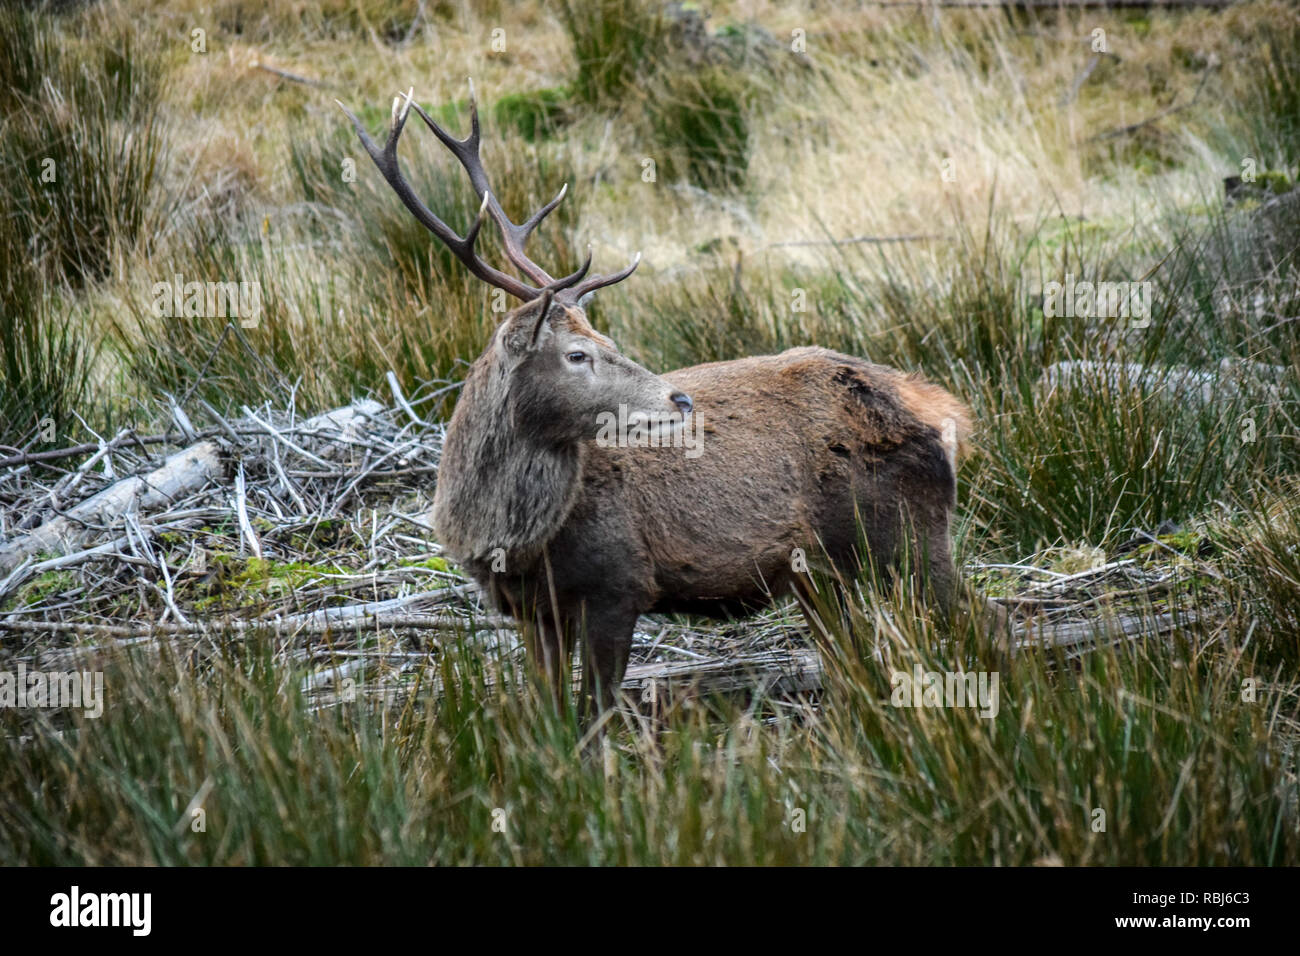 A shot of an amazing Stag in the highlands of Glencoe in Scotland. Stock Photo